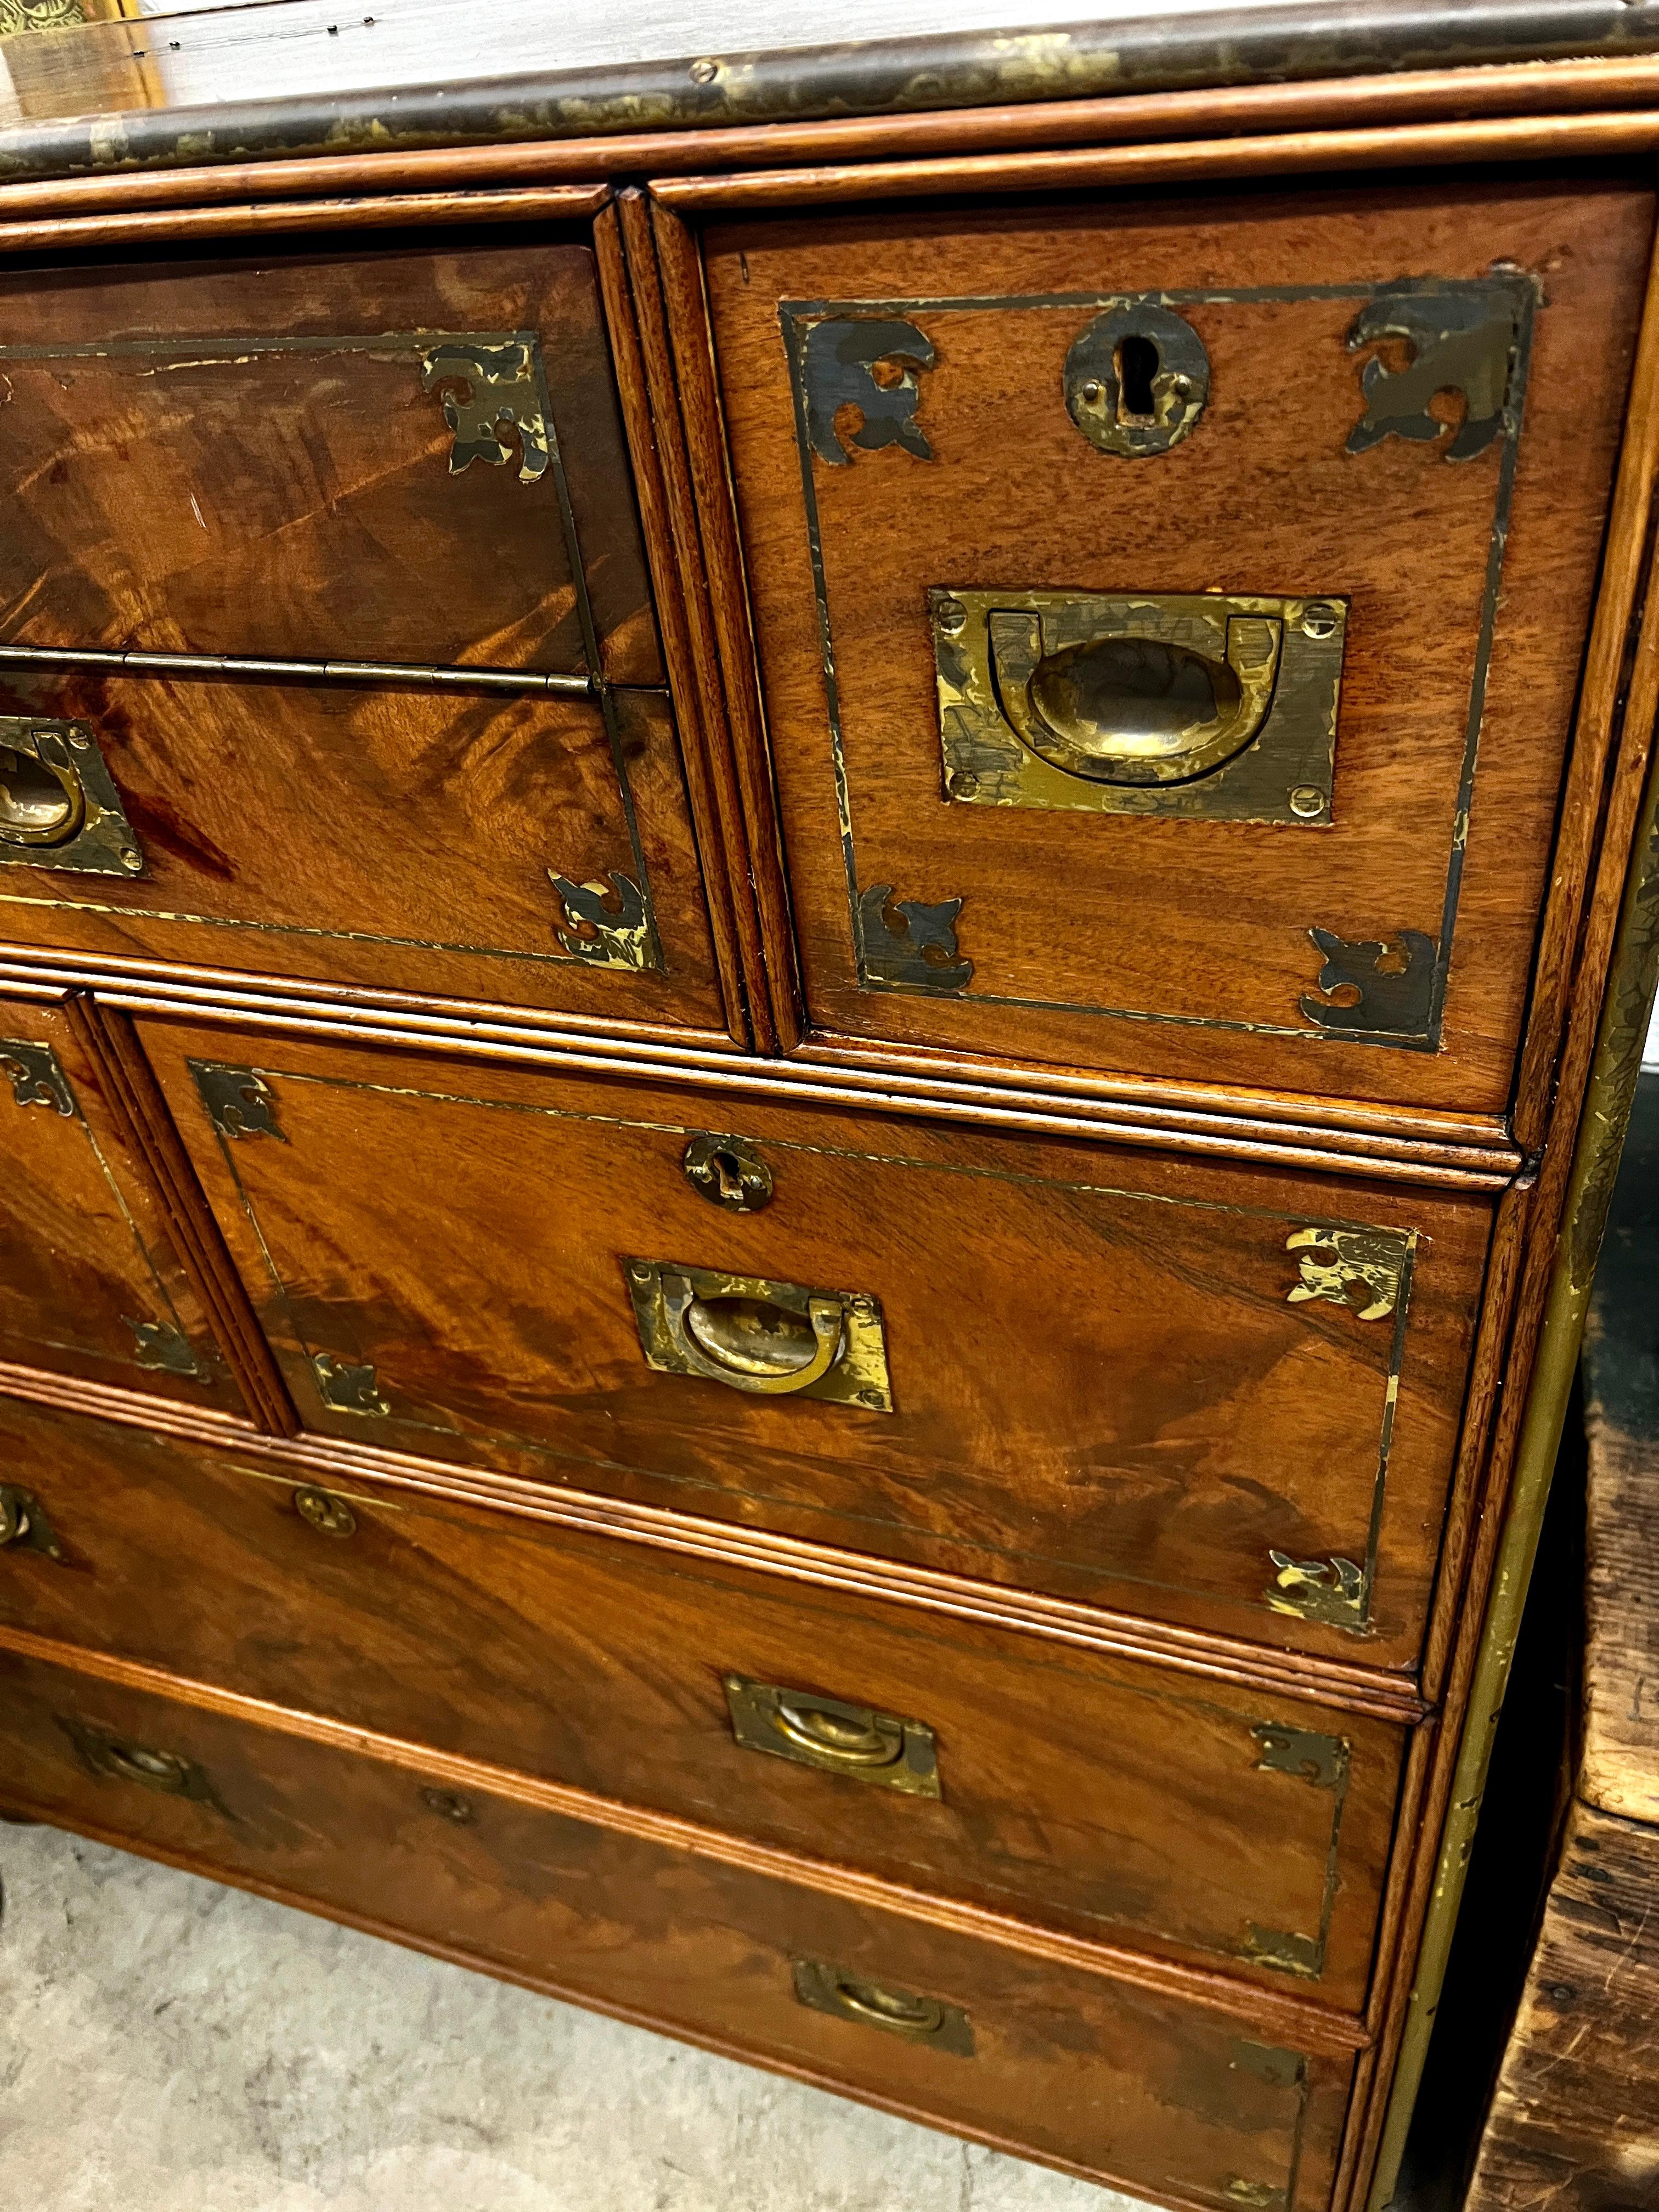 Anglo Raj Regency Campaign Chest with Desk Trimmed in Brass Banding Accents 1811 For Sale 2